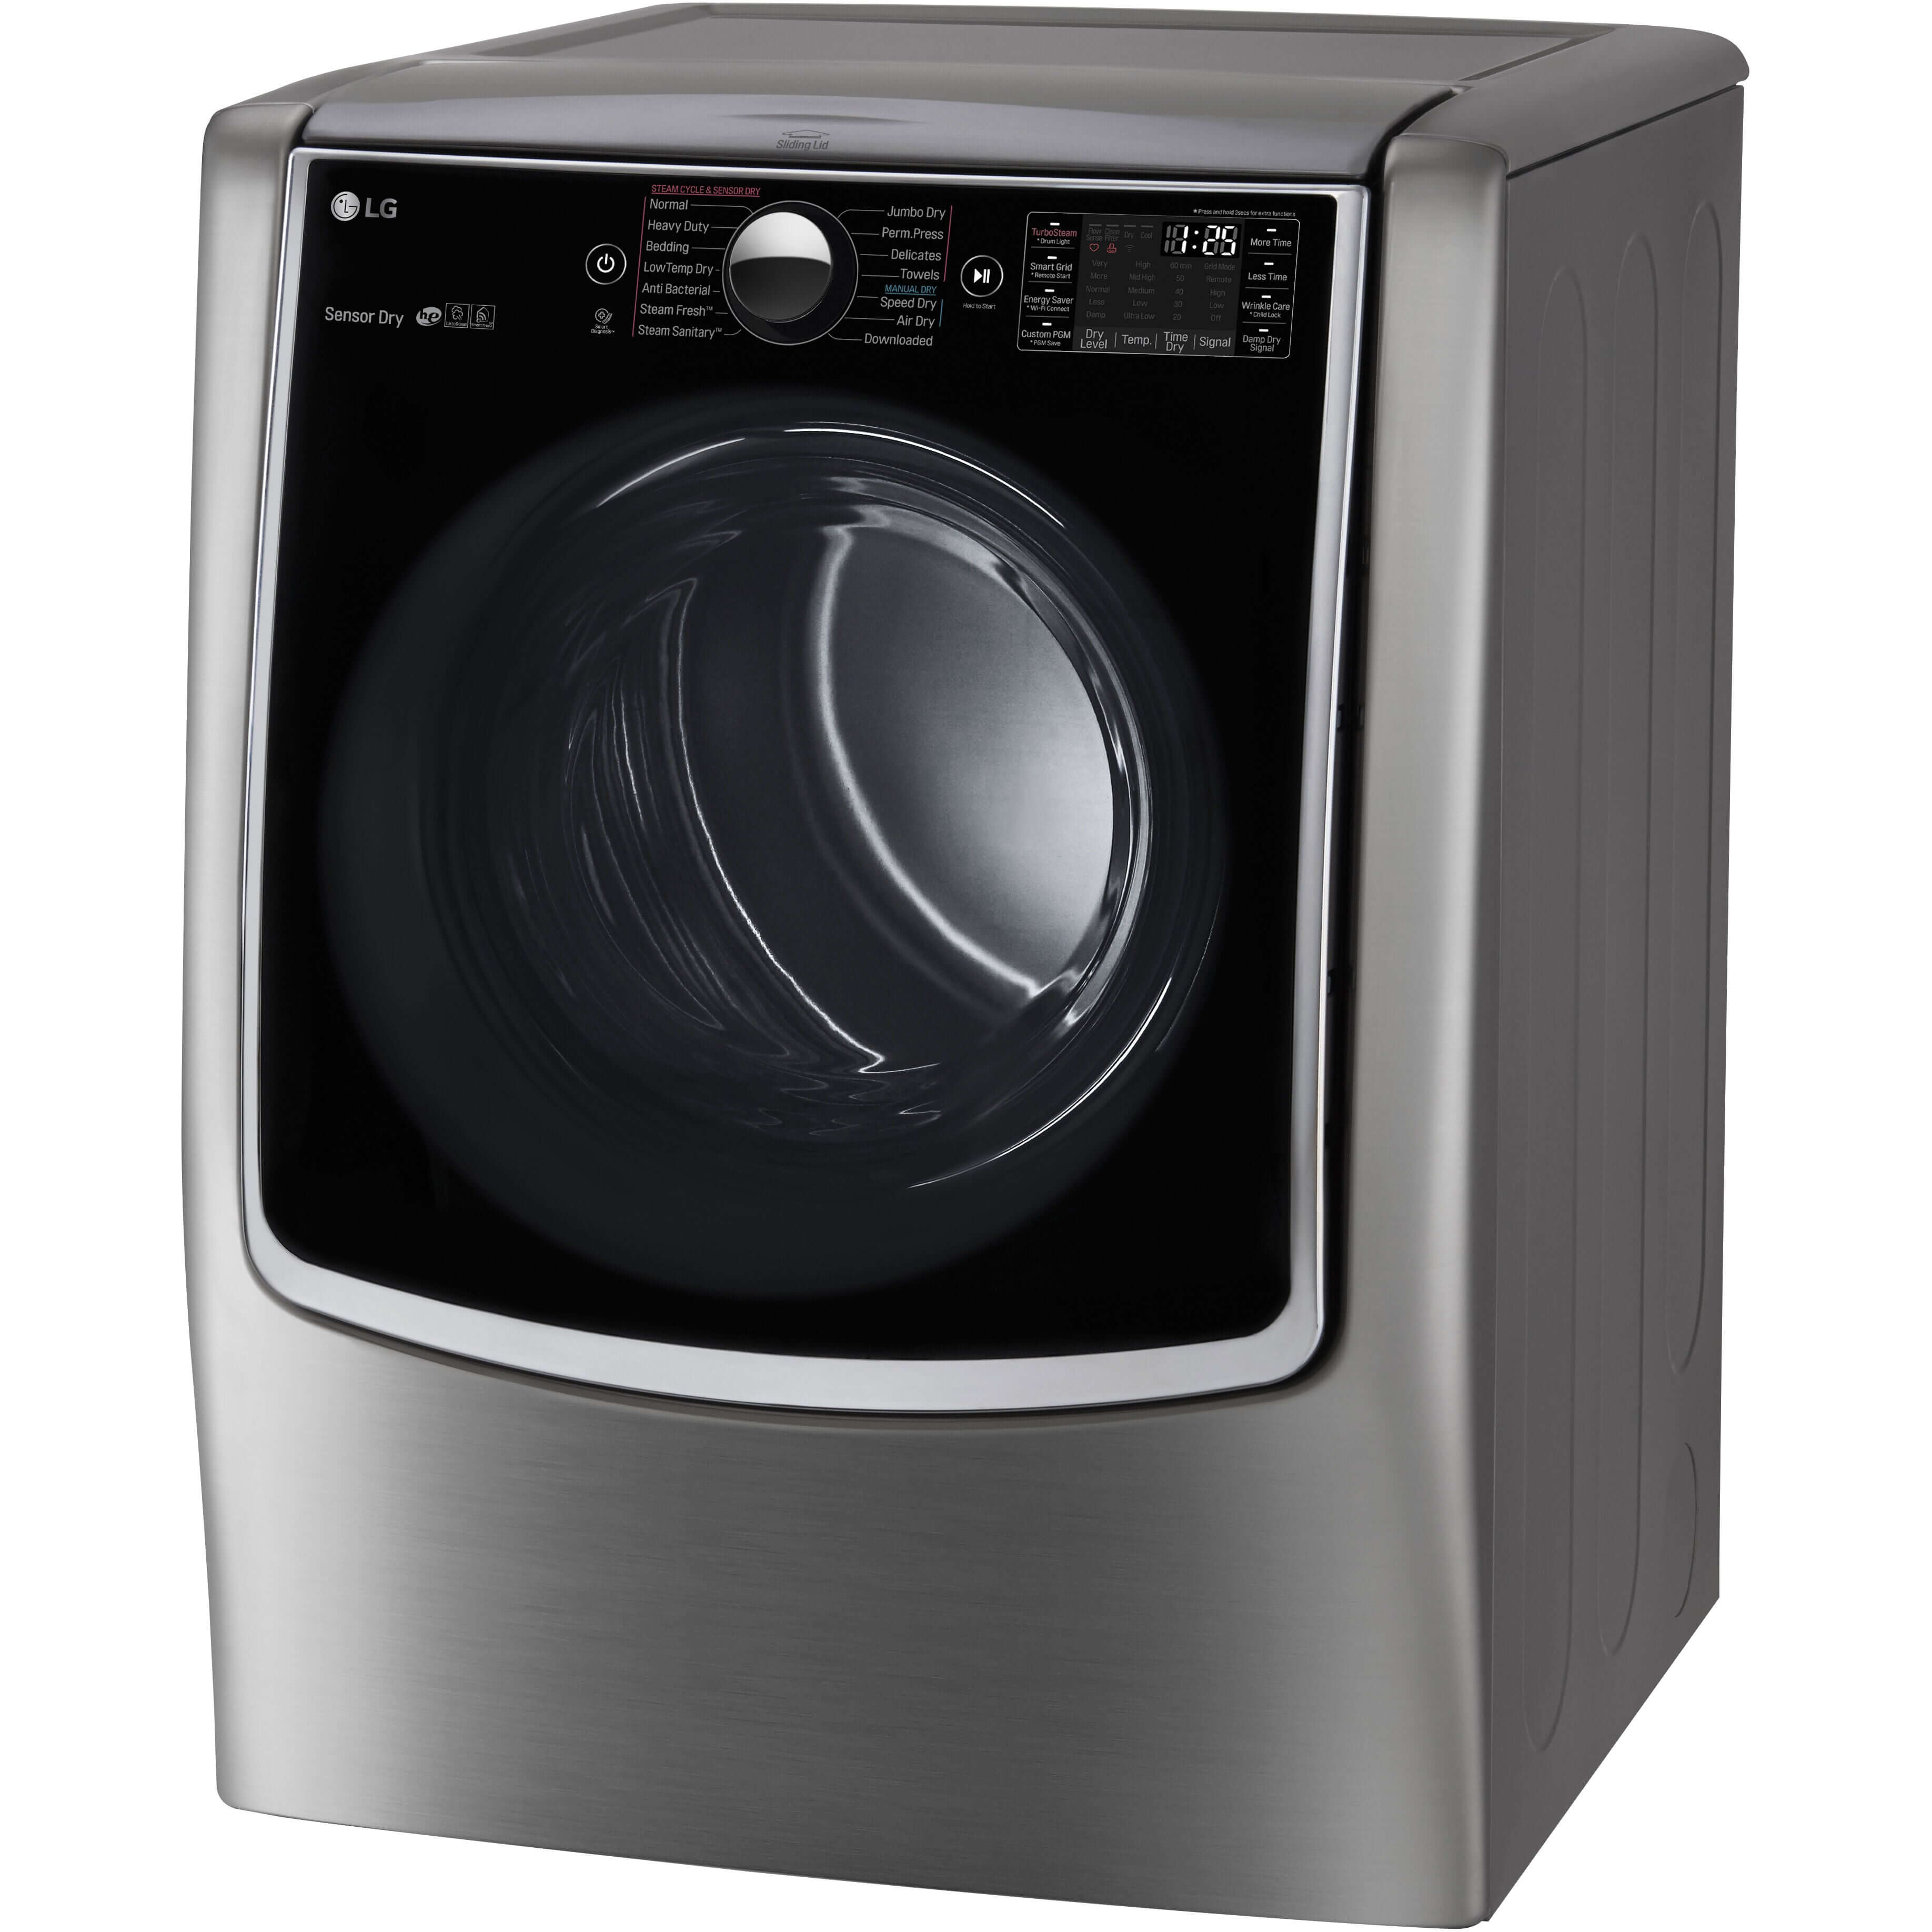 LG 29 Inch Ultra Large Capacity Electric Dryer in Graphite Steel 9 cu. ft. (DLEX9000V)